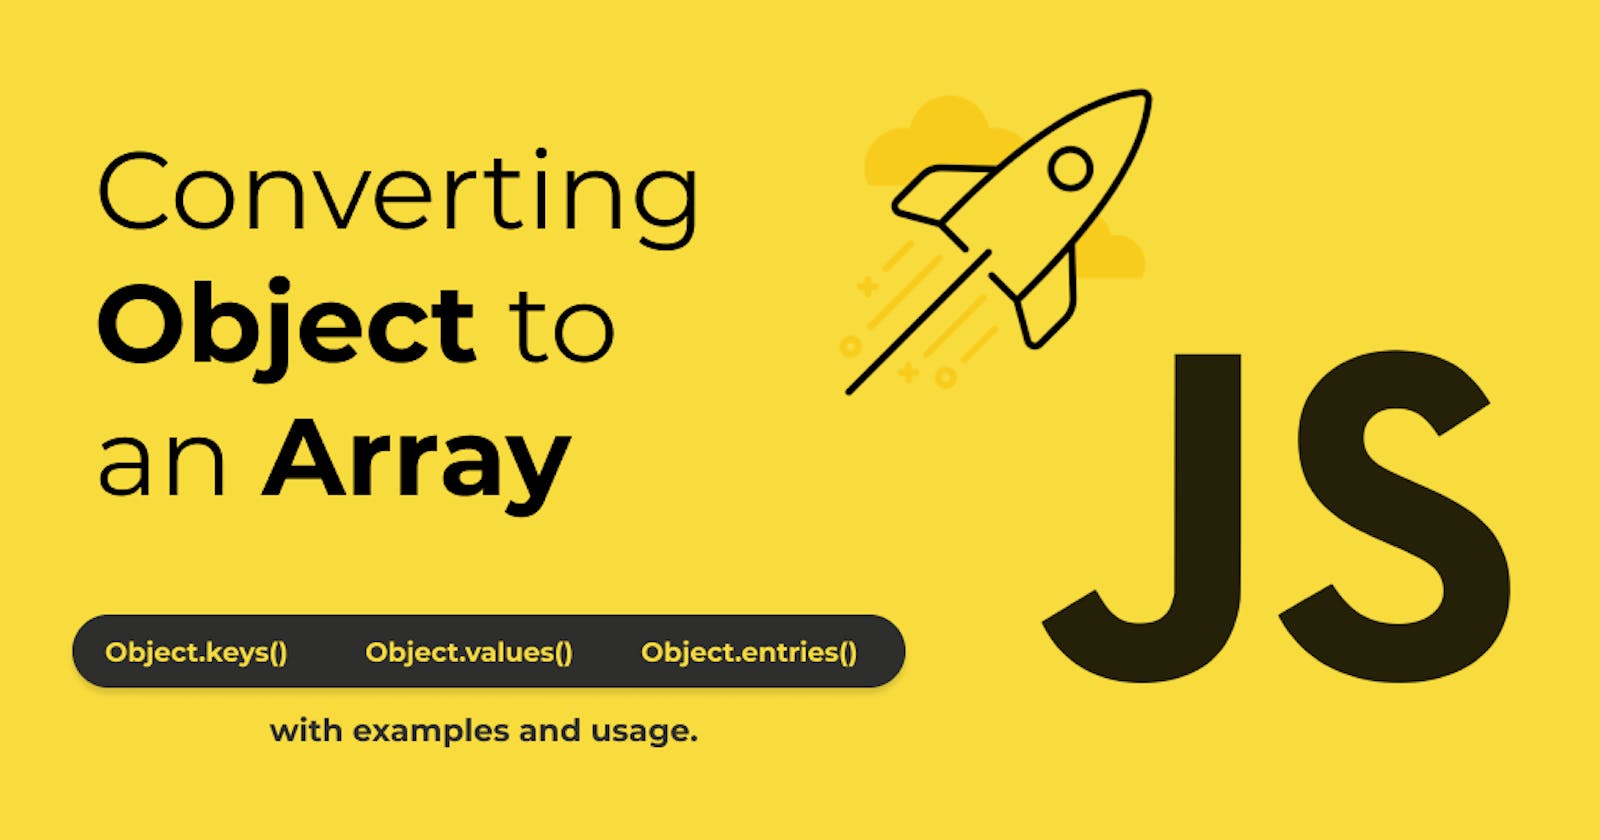 Converting Object to an Array in Javascript